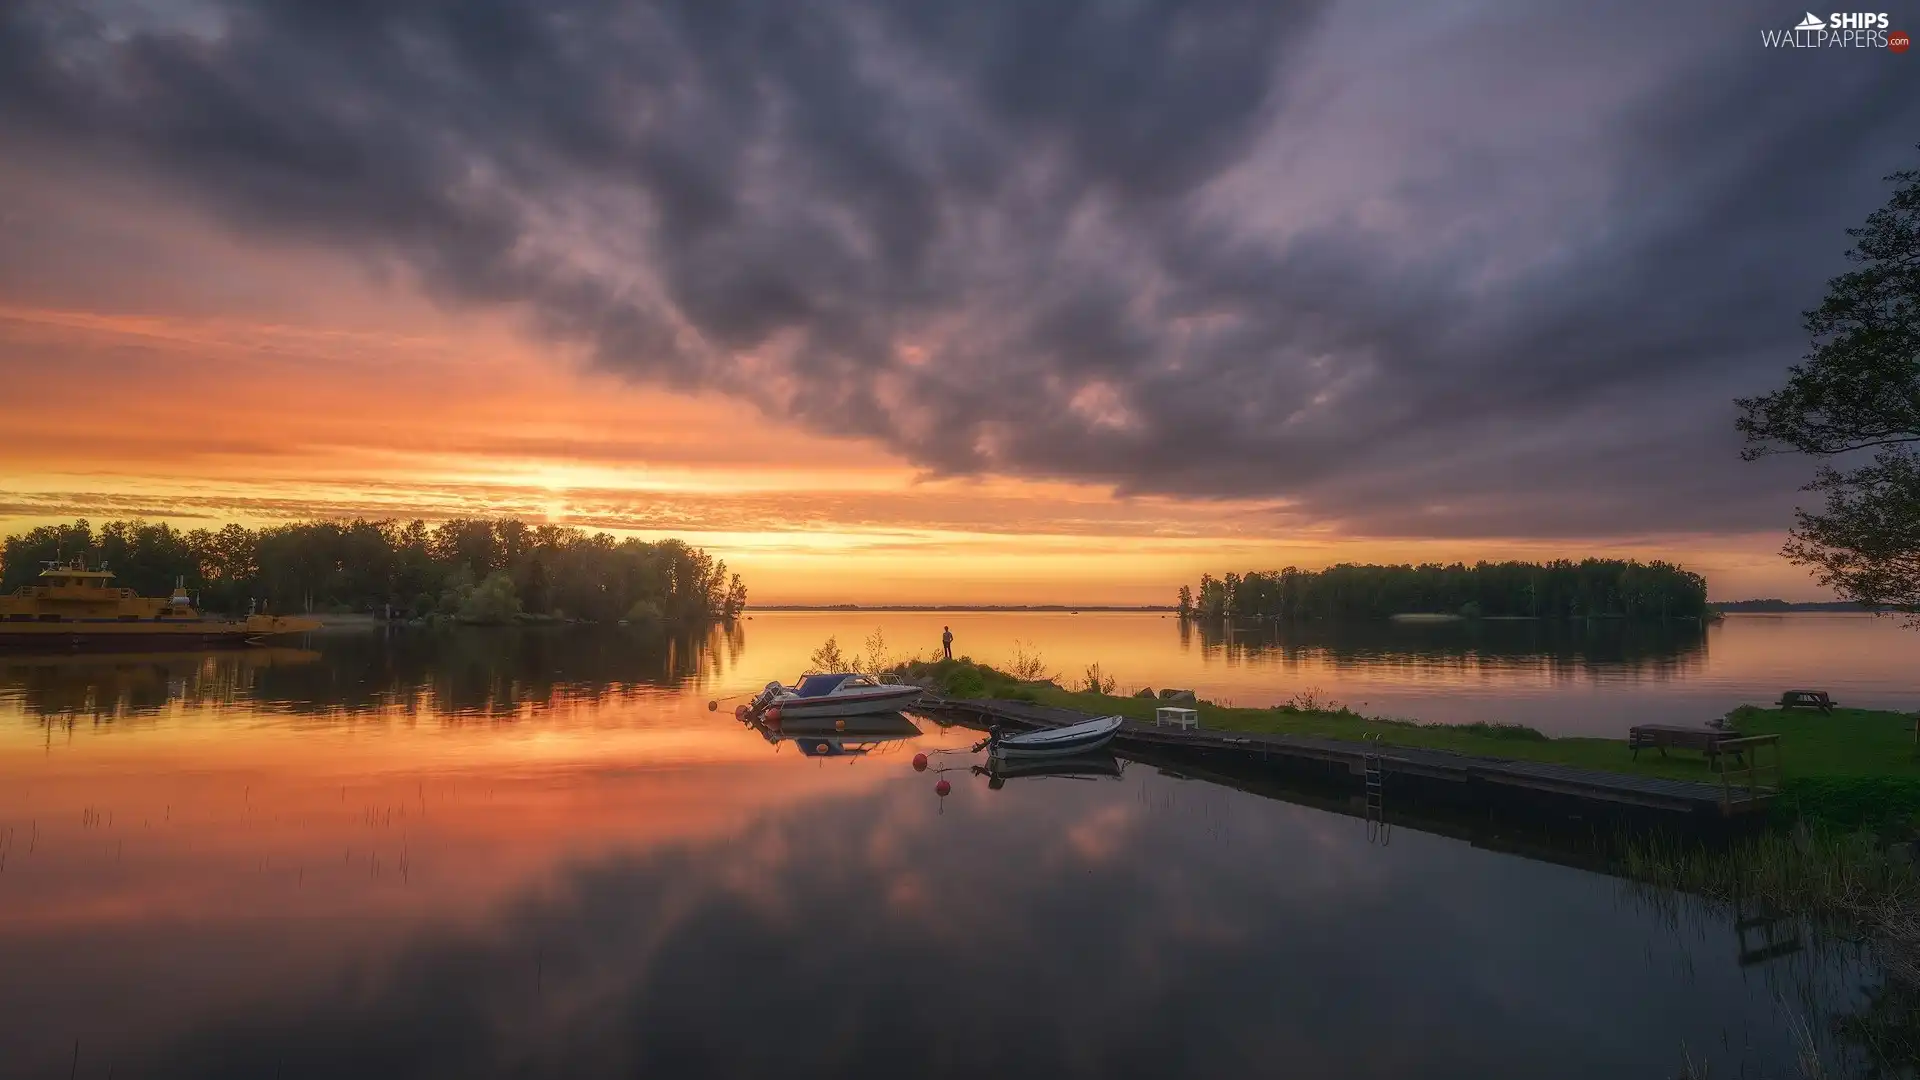 Boat, forest, clouds, trees, Great Sunsets, Platform, lake, viewes